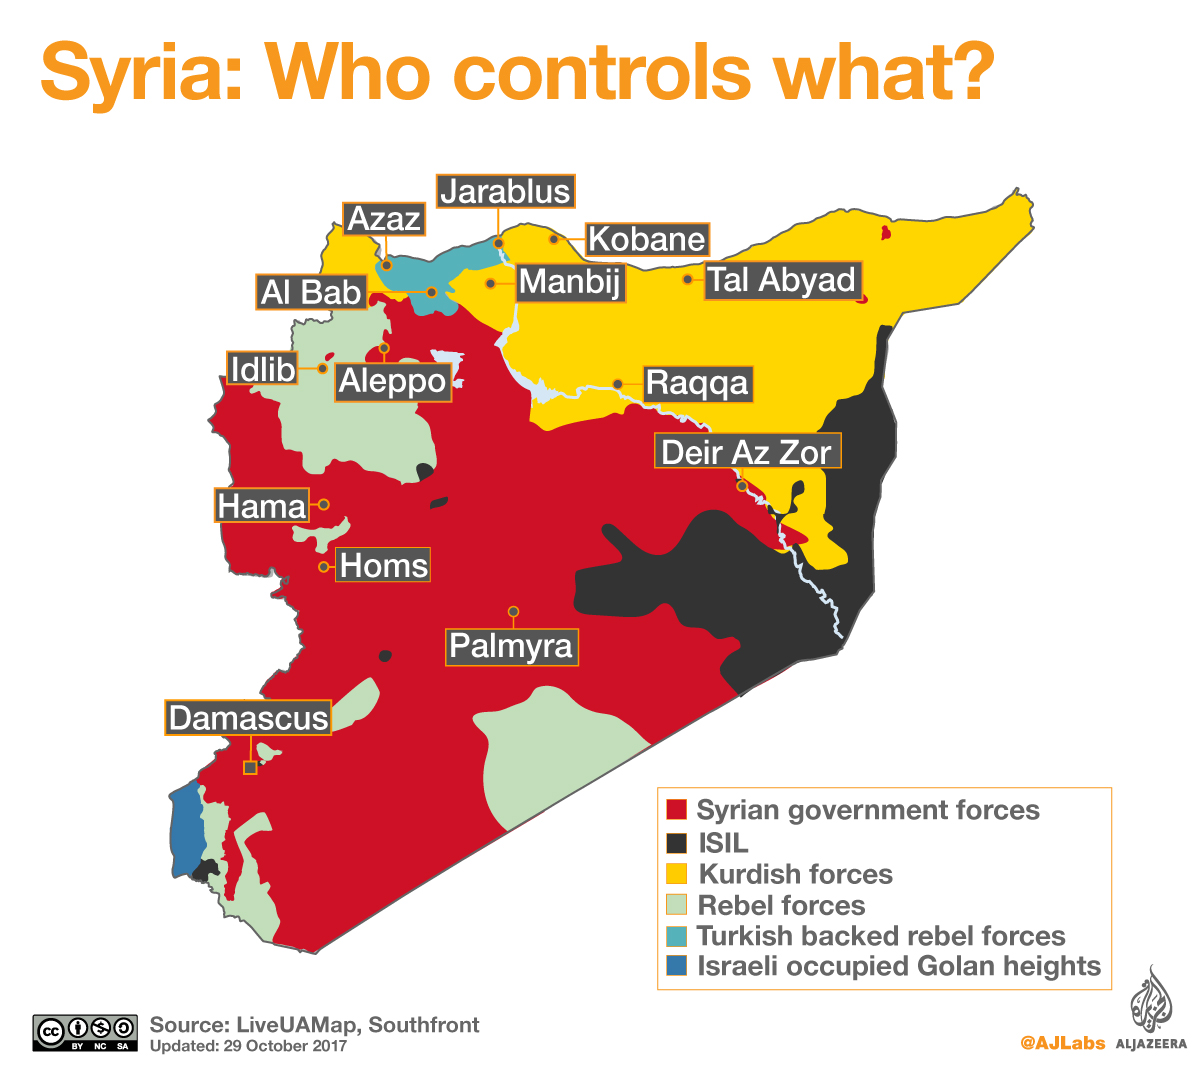 Who controls what in Syria